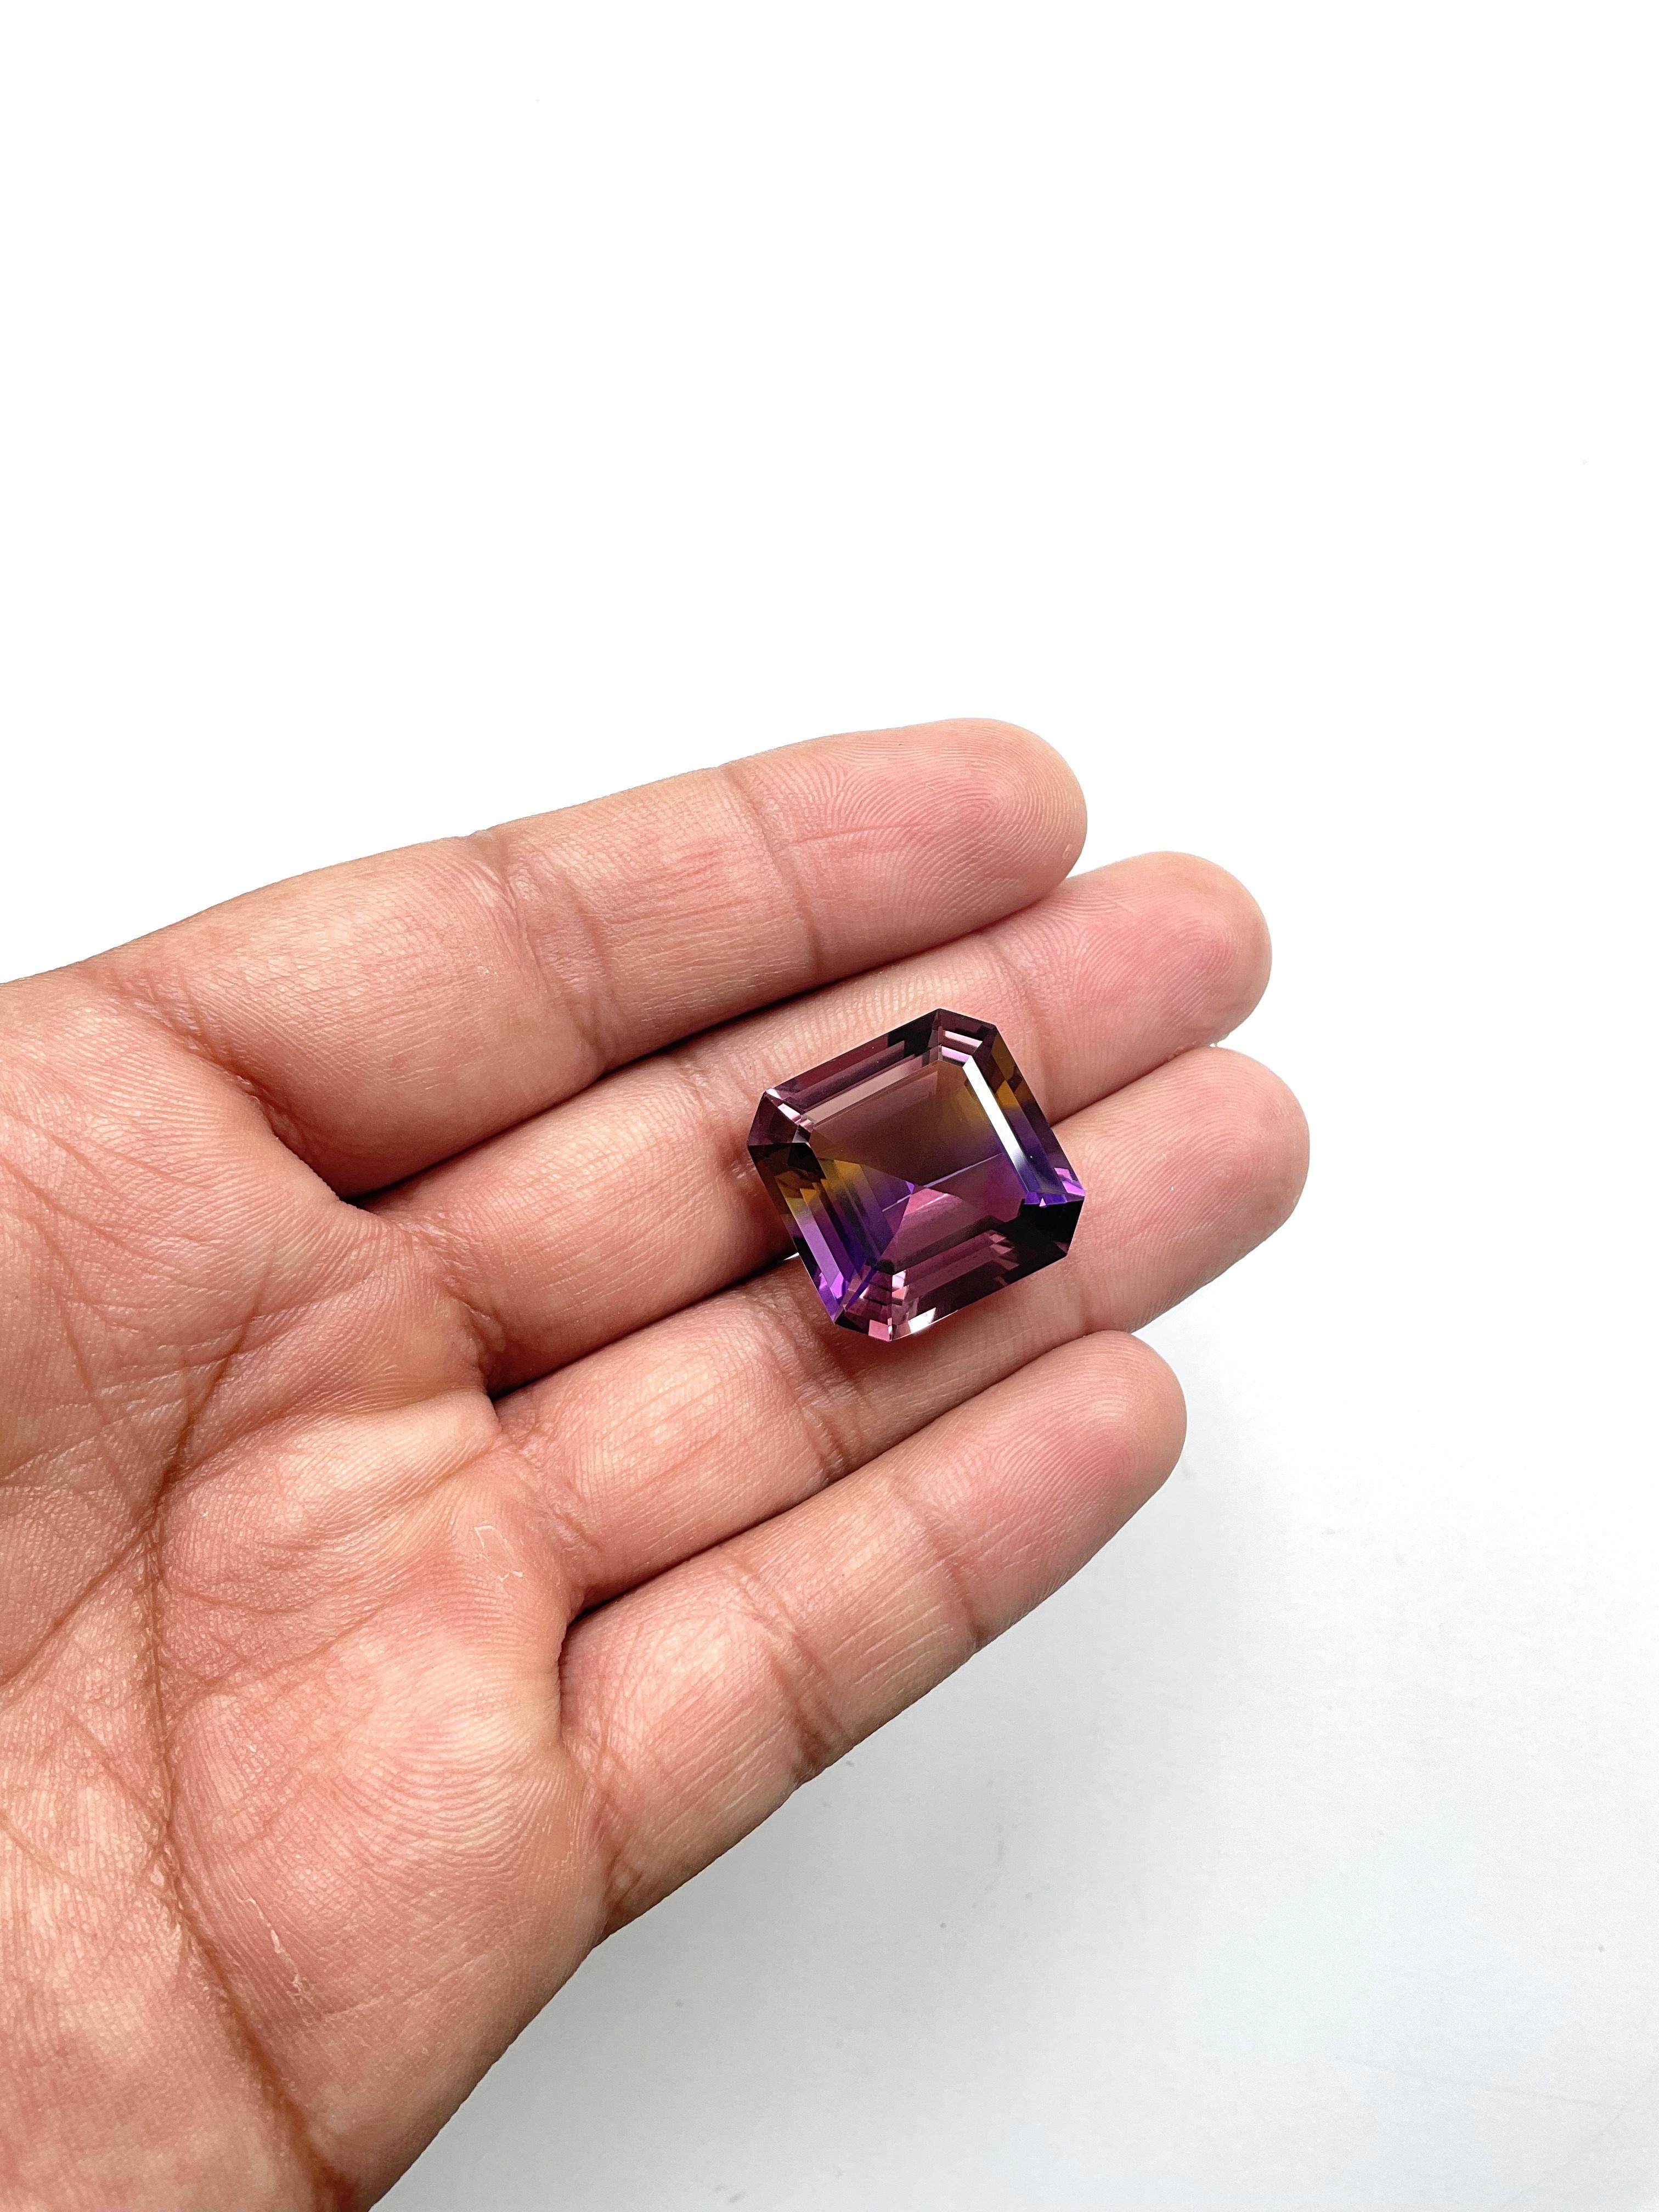 Loupe clean 30.88 cts Ametrine Cushion Faceted Cut Stone For Jewelry Natural Gem For Sale 1